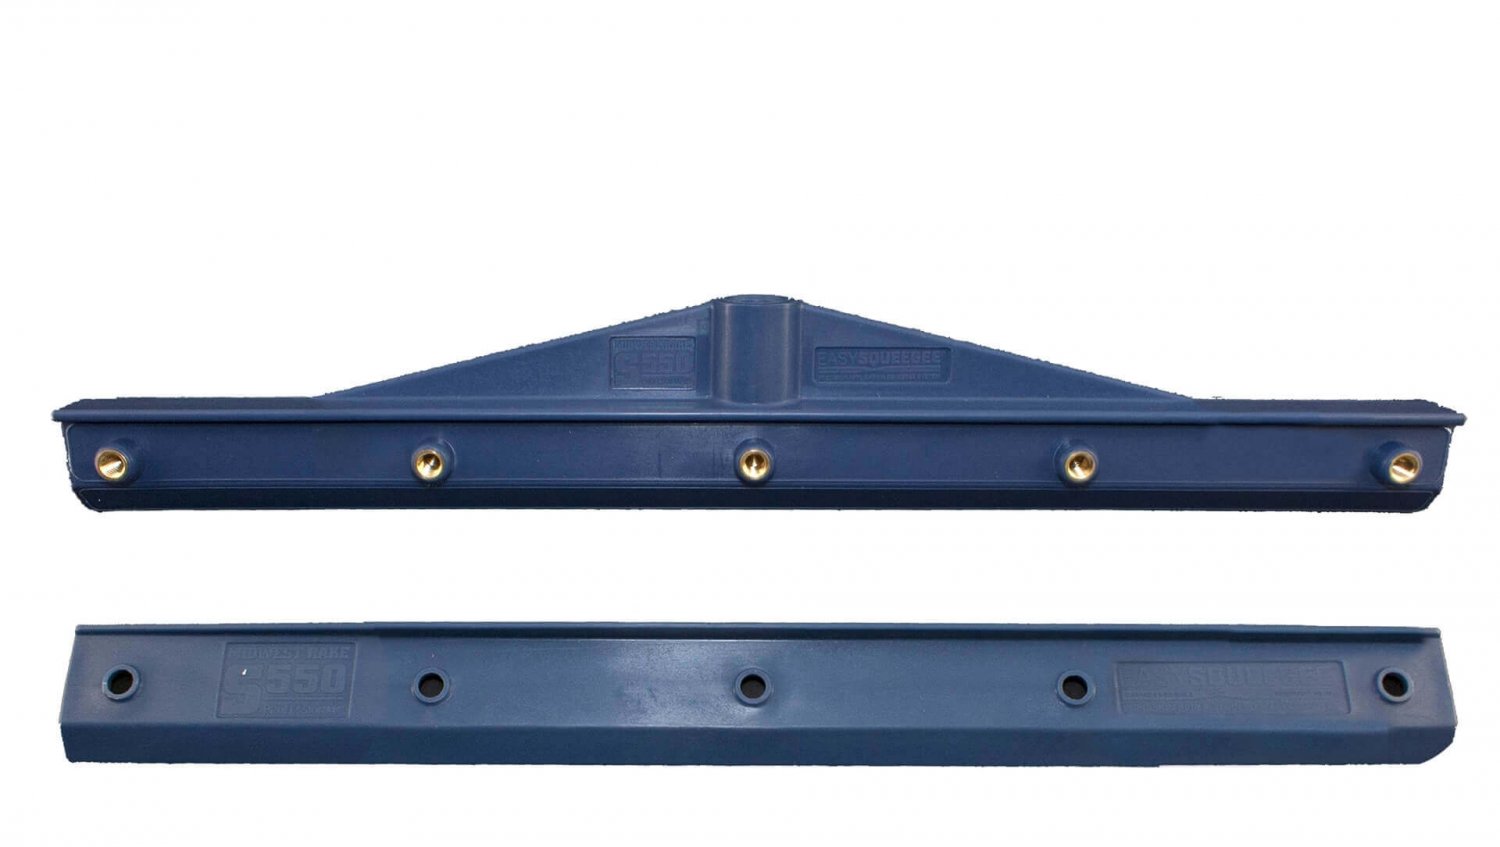 18" Easy Squeegee frame